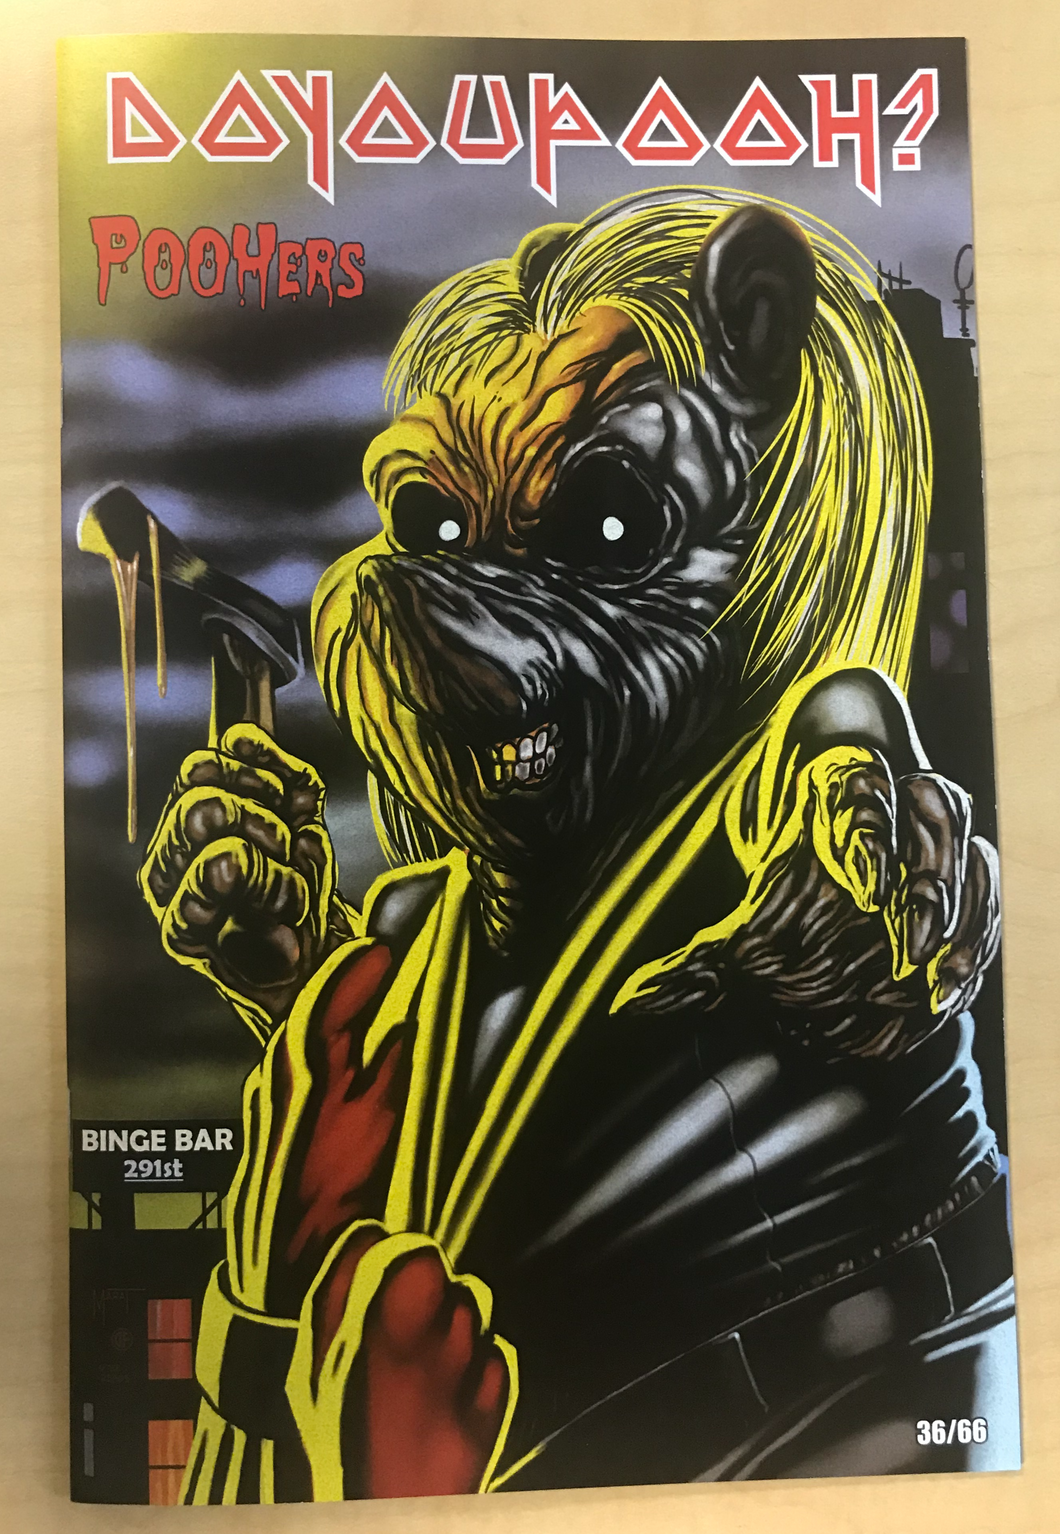 Do You Pooh? #1 IRON MAIDEN Killers Derek Riggs Album Cover Homage Variant Cover by Marat Mychaels Limited to 66 Serial Numbered Copies Jesse James Comics Exclusive!!!